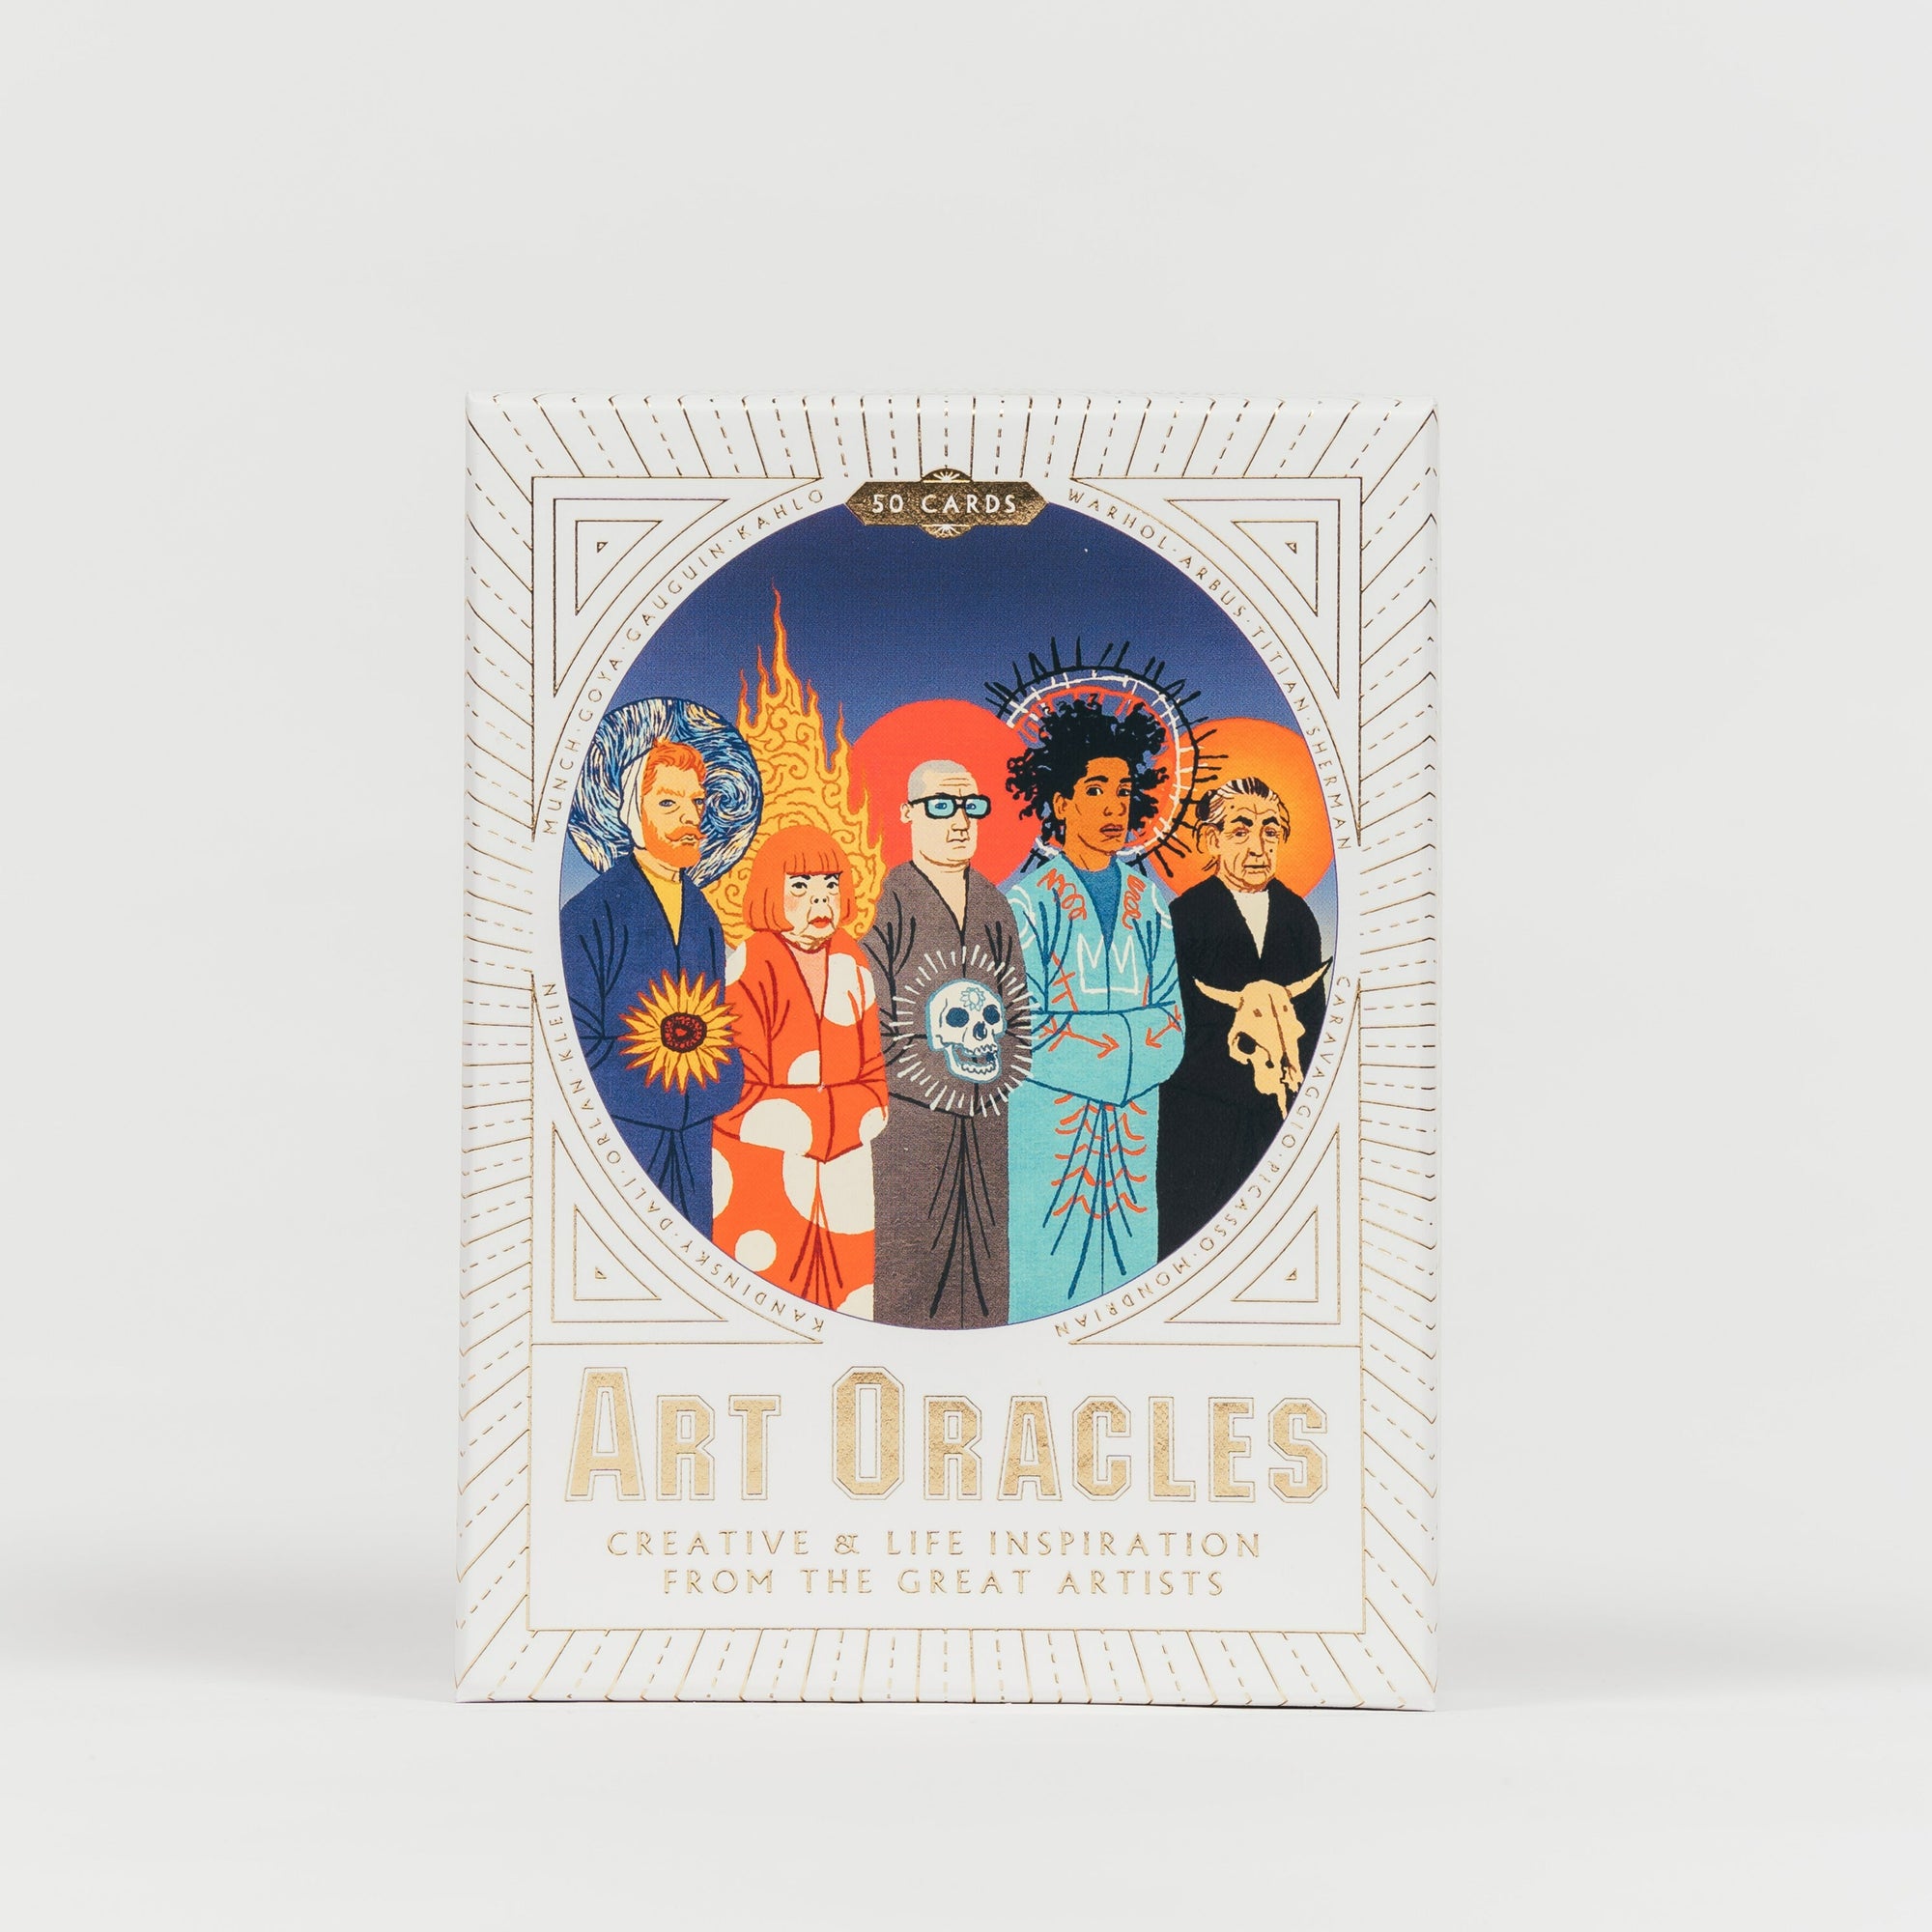 Art Oracles 50 Cards